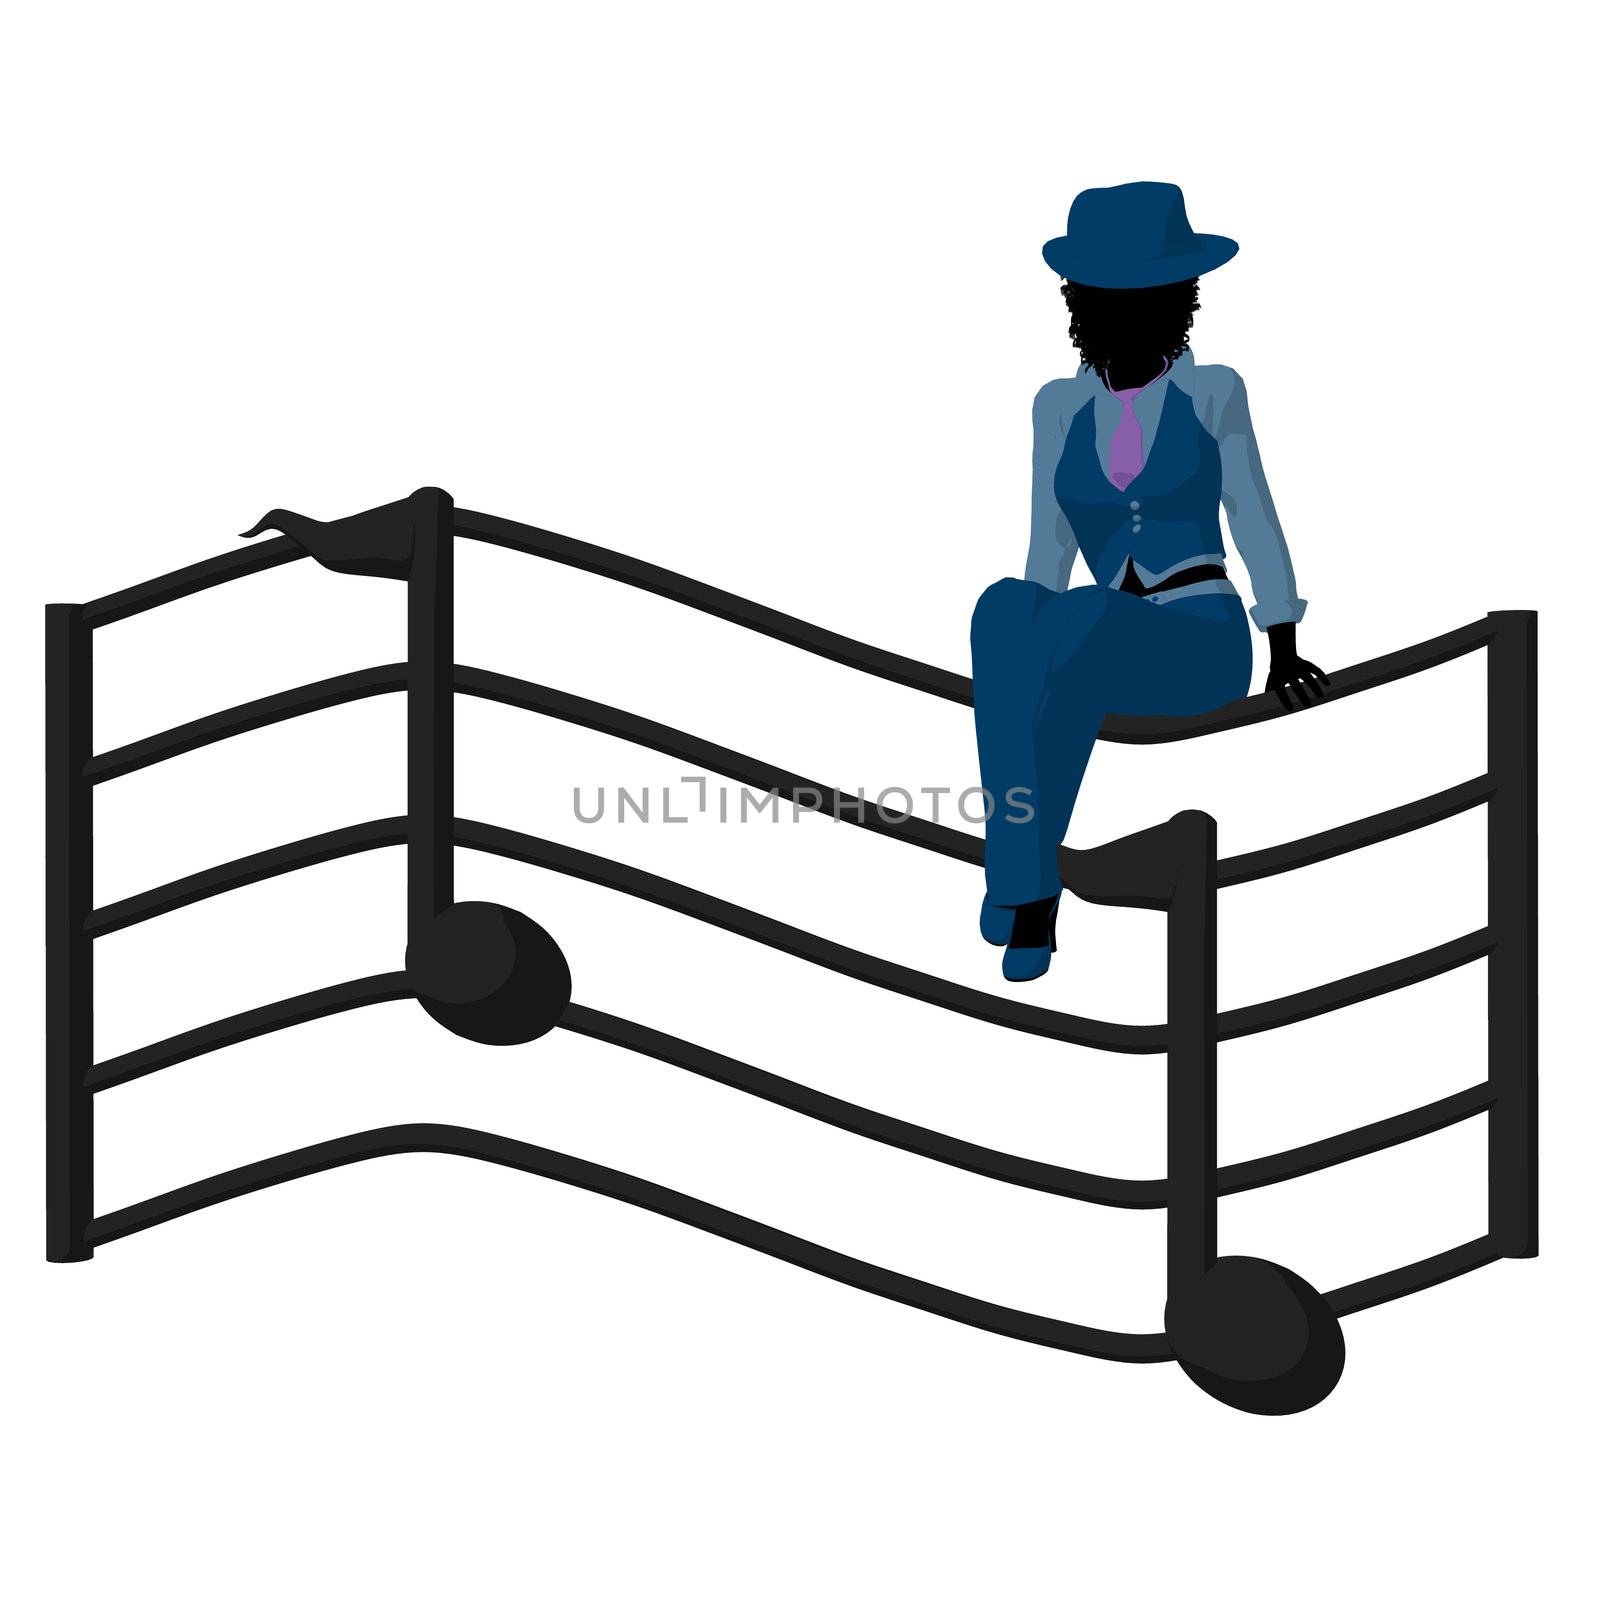 African American Jazz Musician Illustration by kathygold